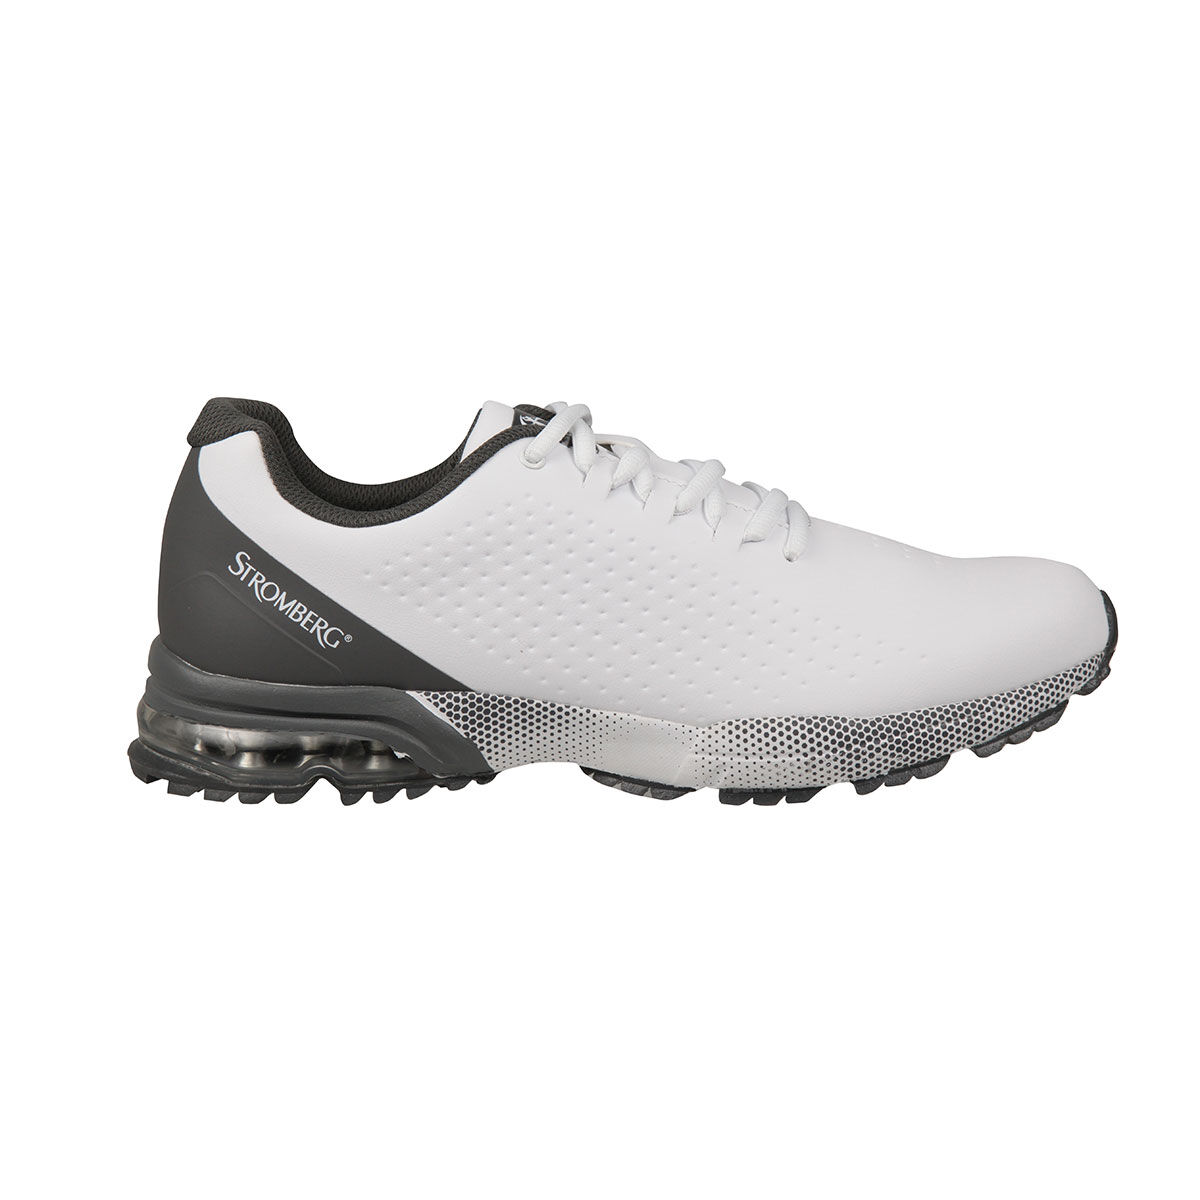 Stromberg Mens White and Grey Waterproof Ailsa Spikeless Golf Shoes, Size: 8 | American Golf von Stromberg